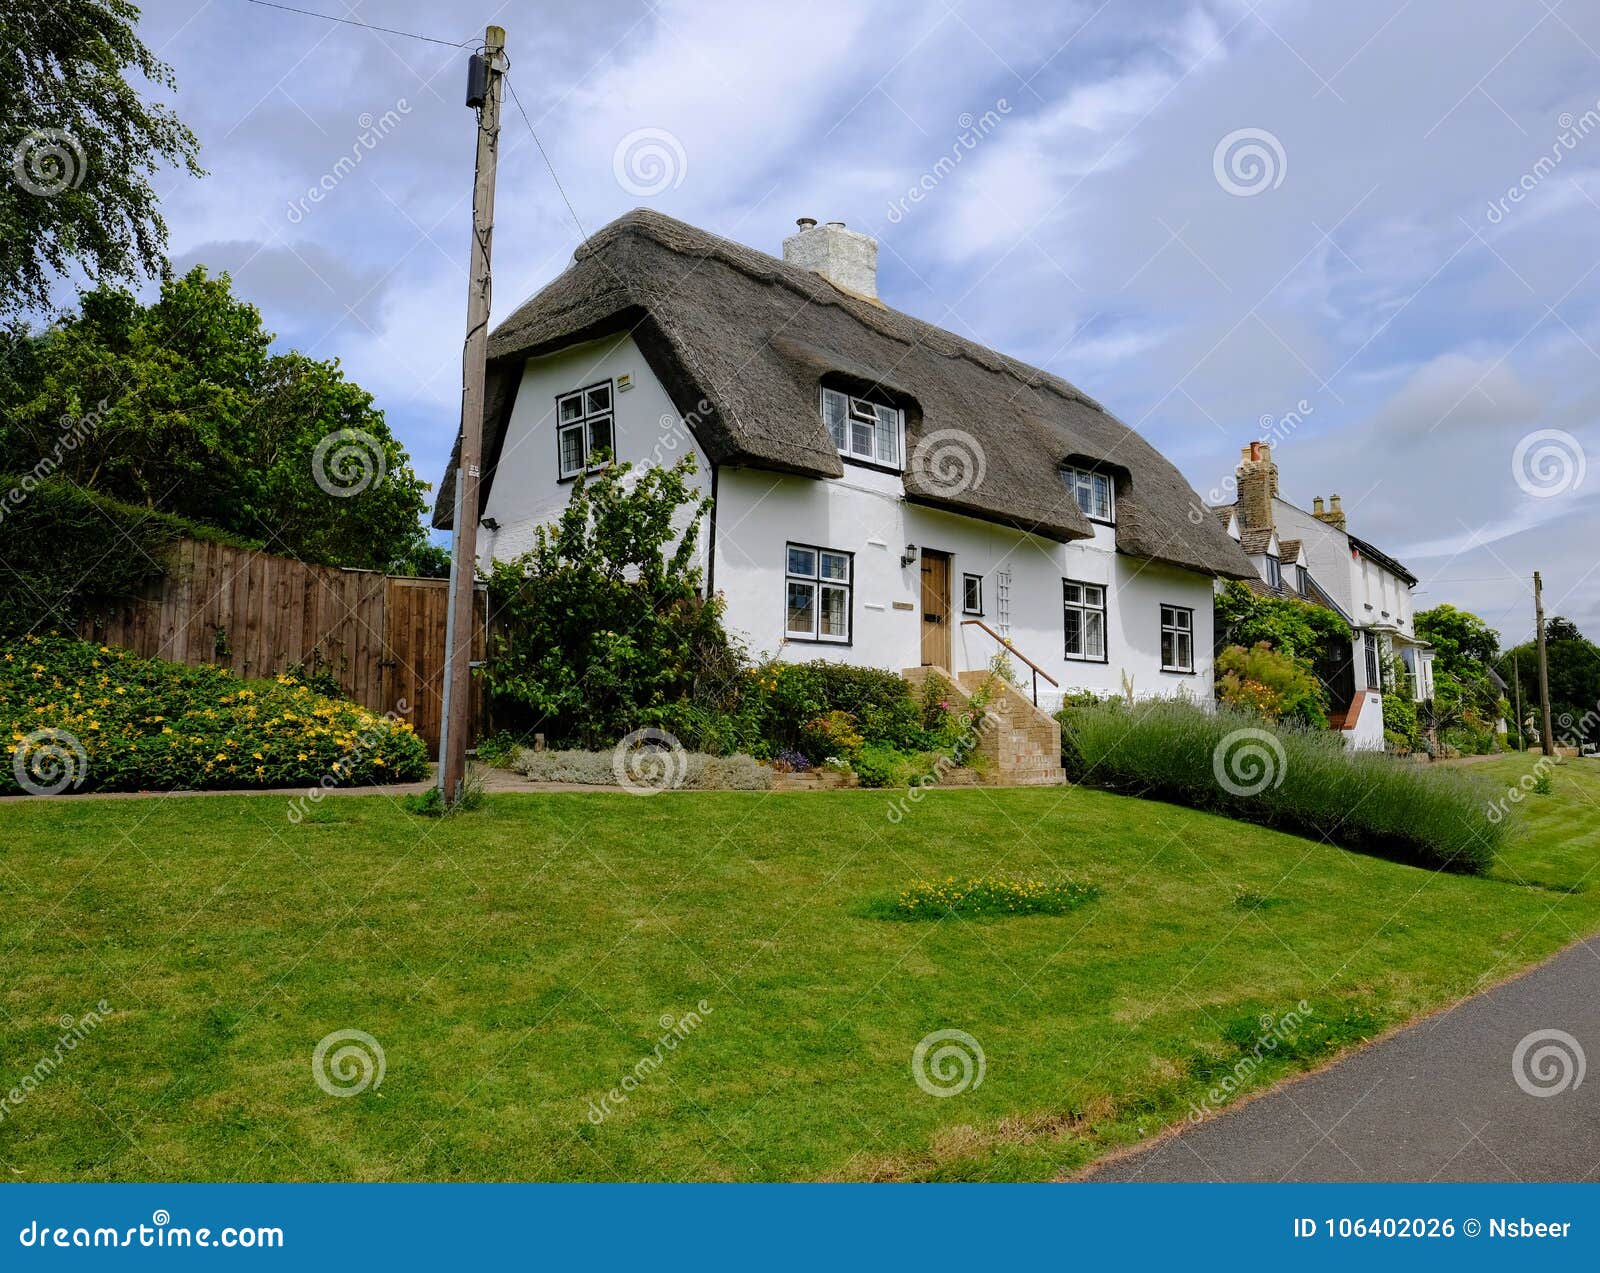 View Of A Traditional English Cottage And Thatched Roof With A